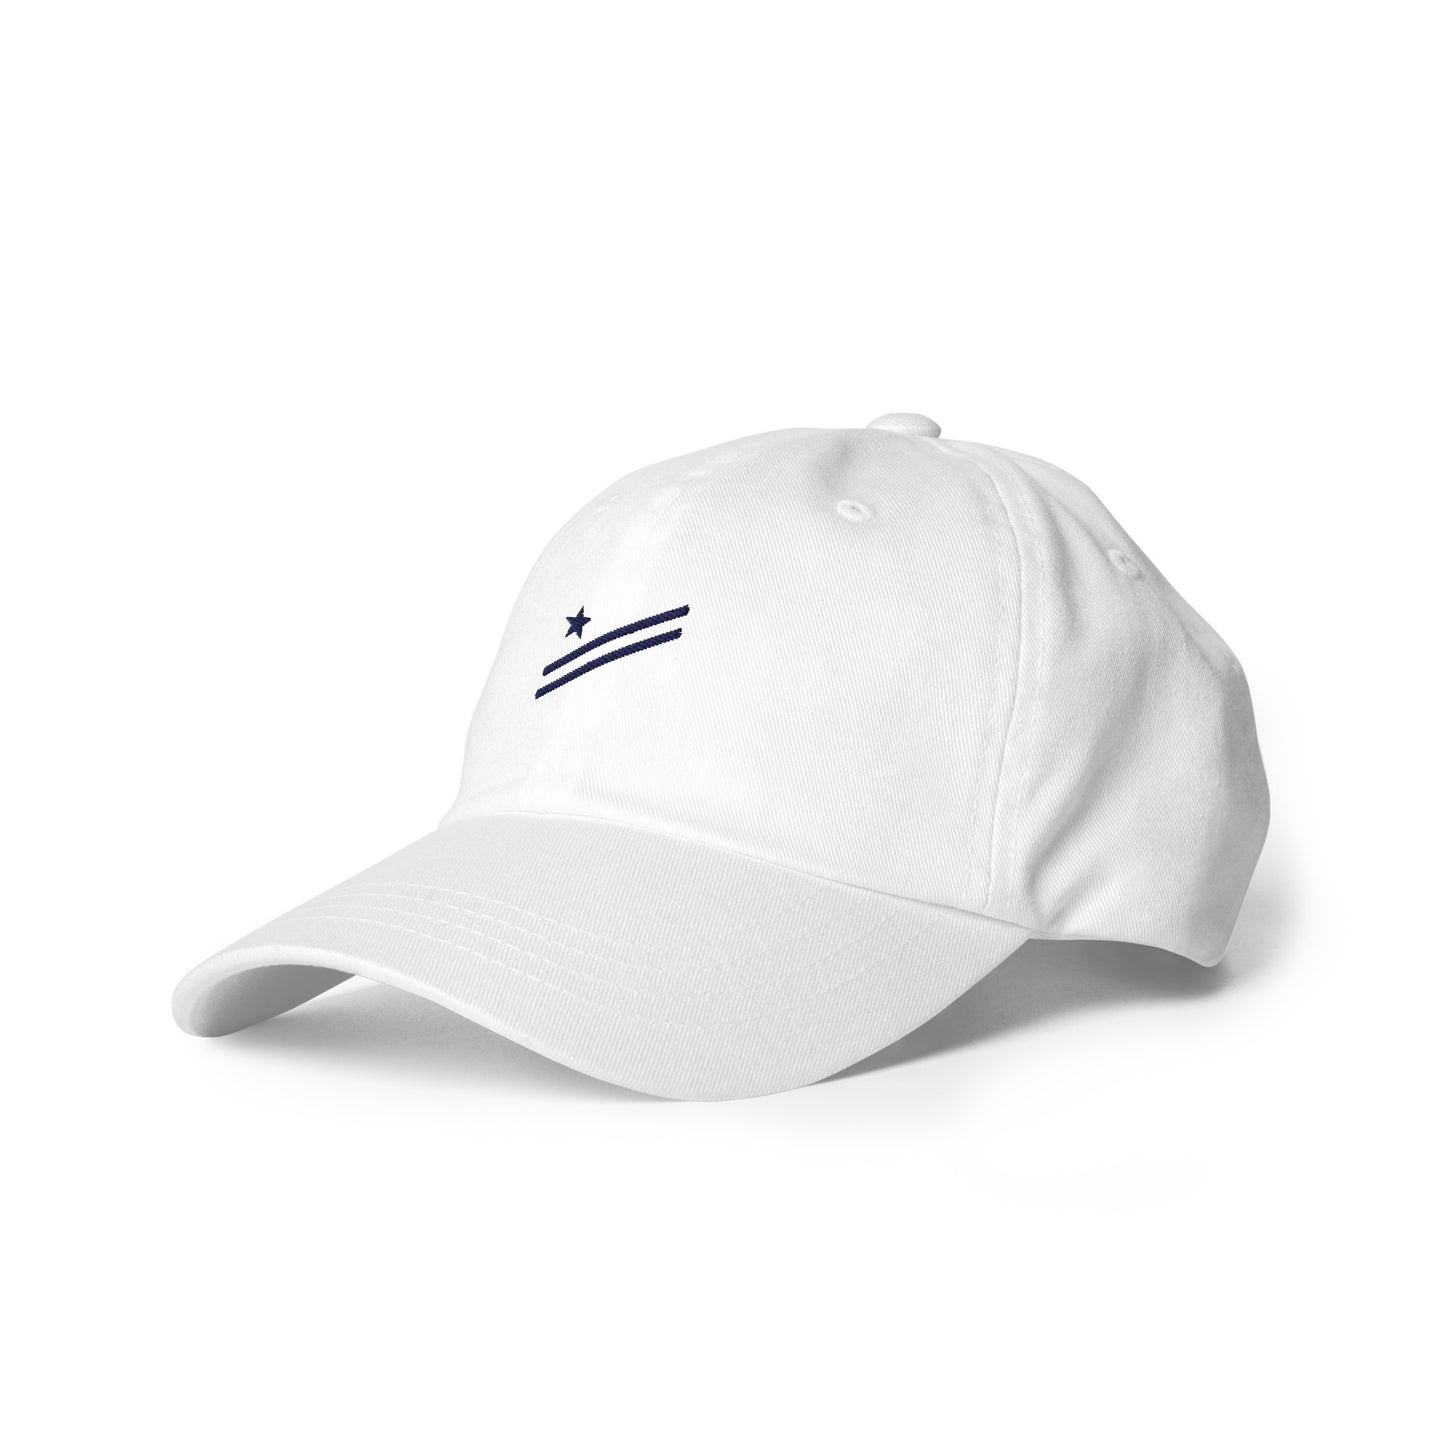 Martyrs - Classic Dad hat - NAVY FLAG broderie